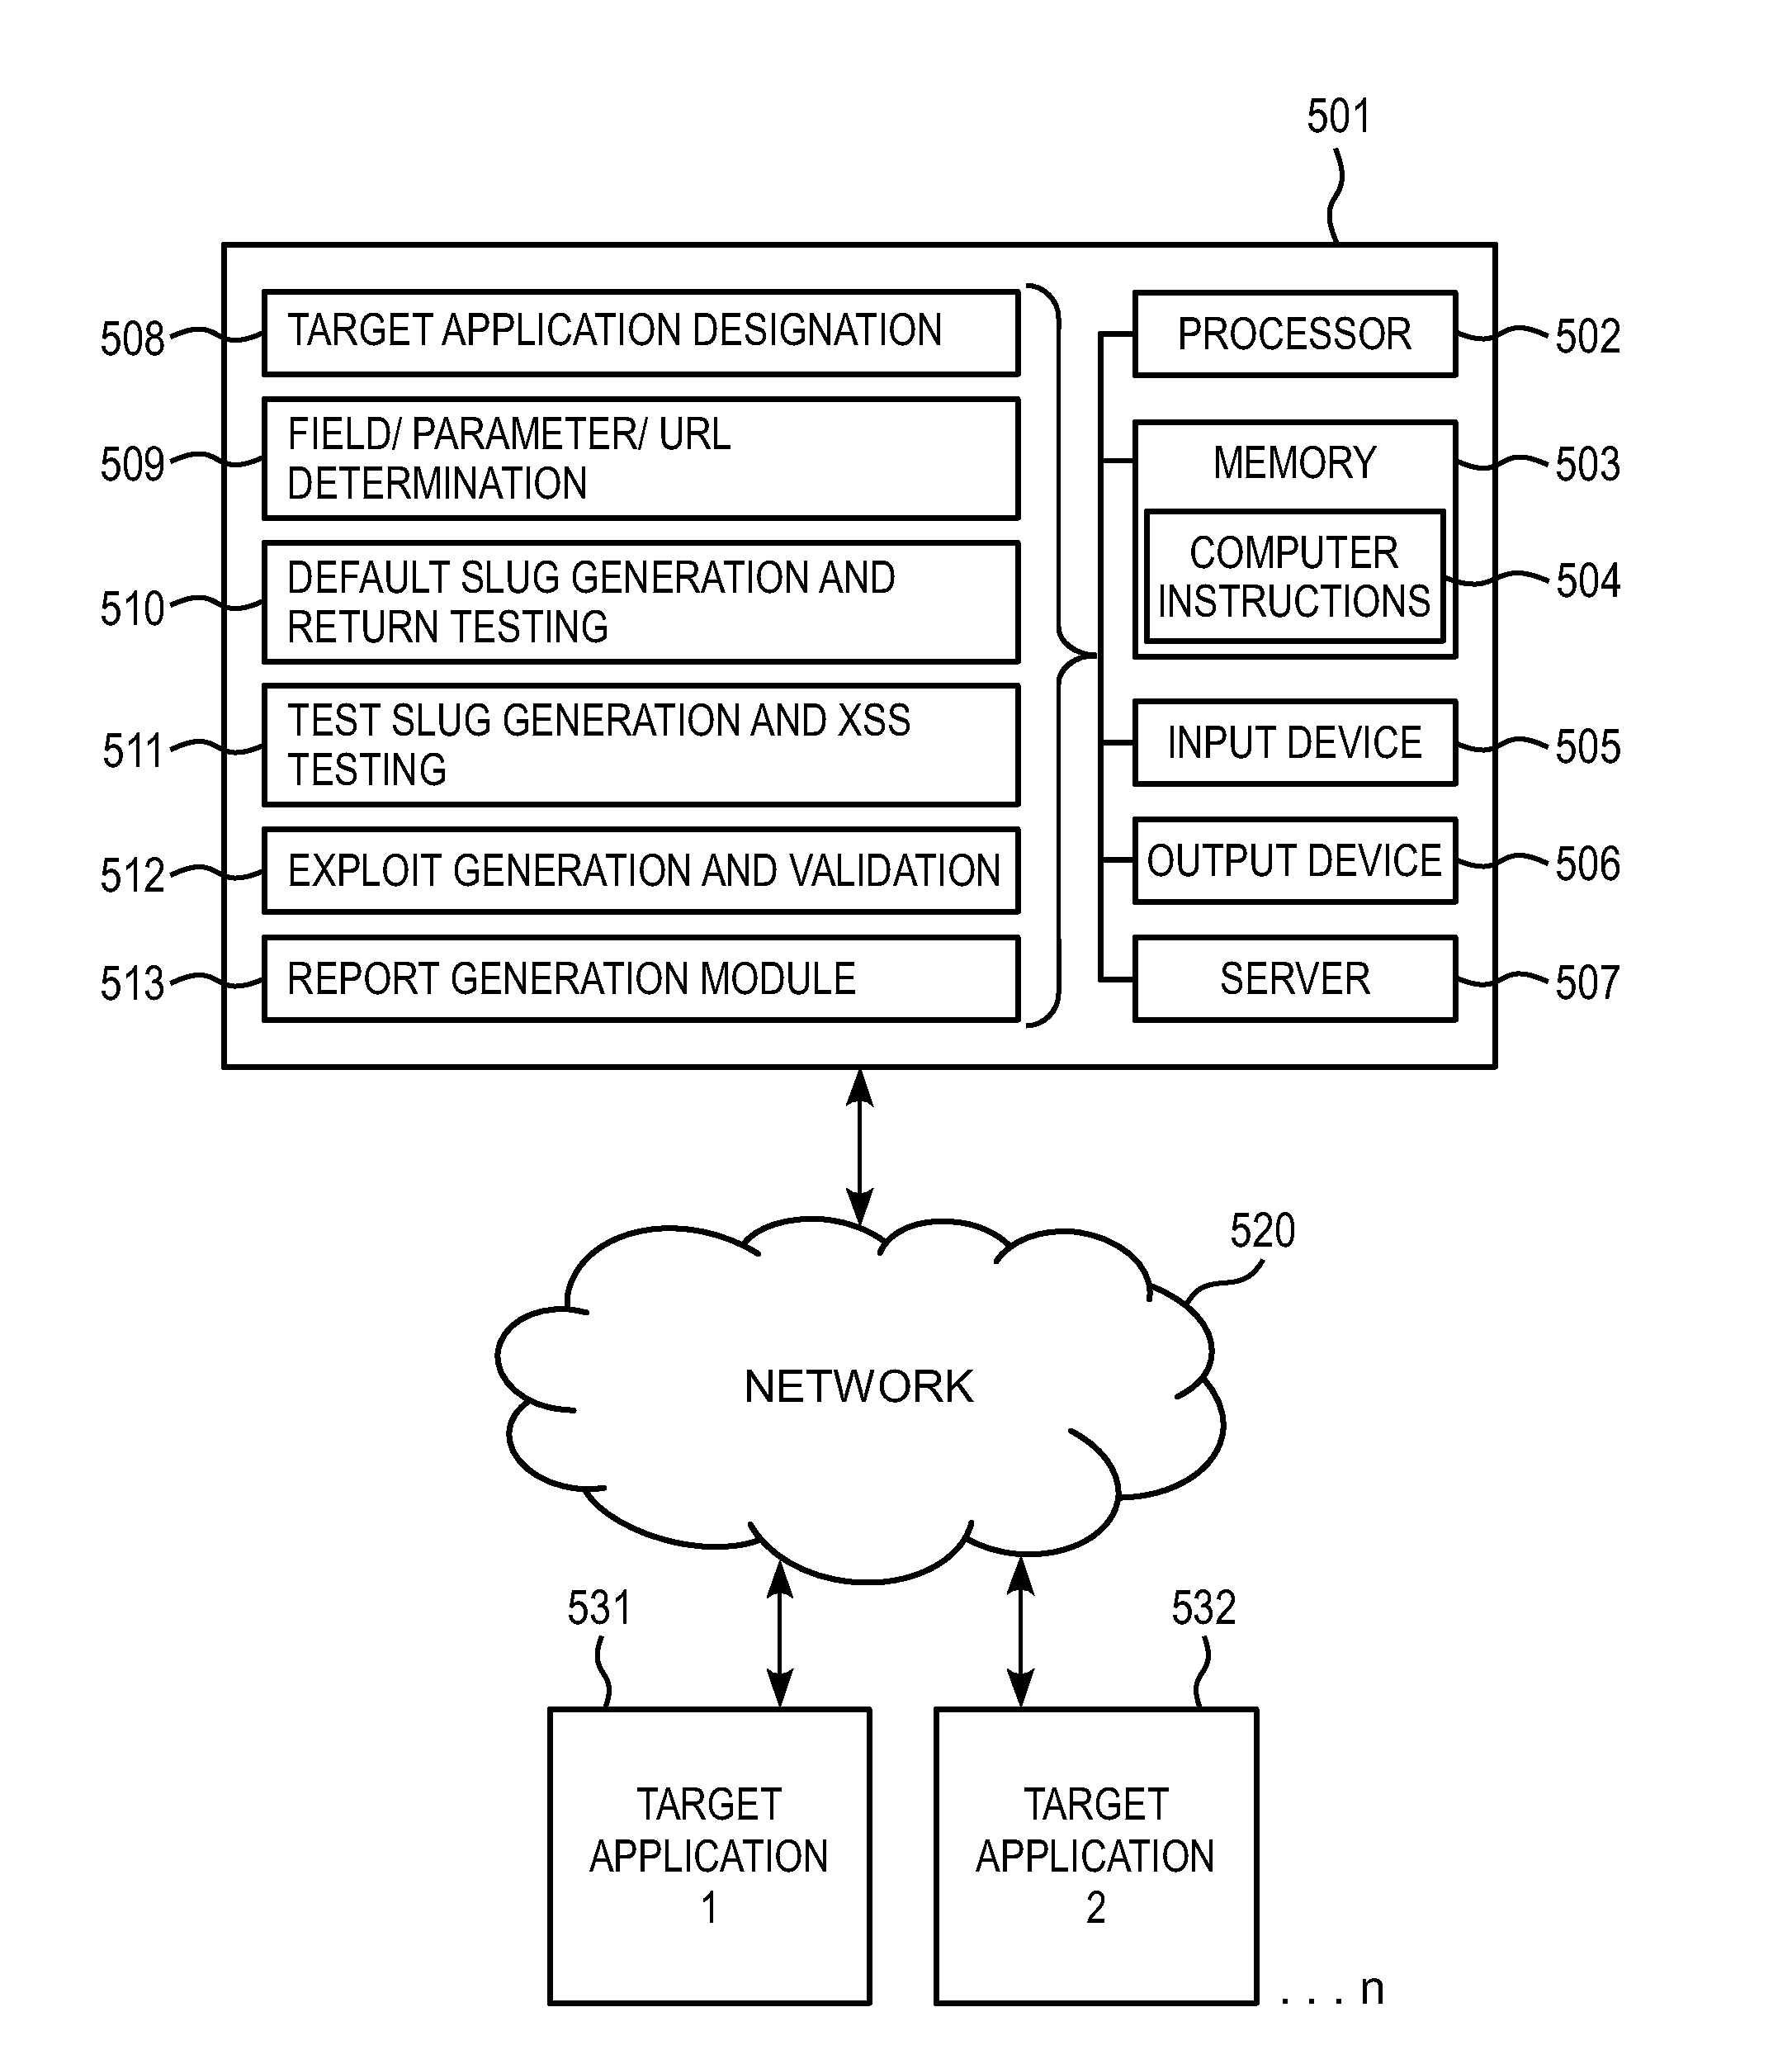 Methods for determining cross-site scripting and related vulnerabilities in applications